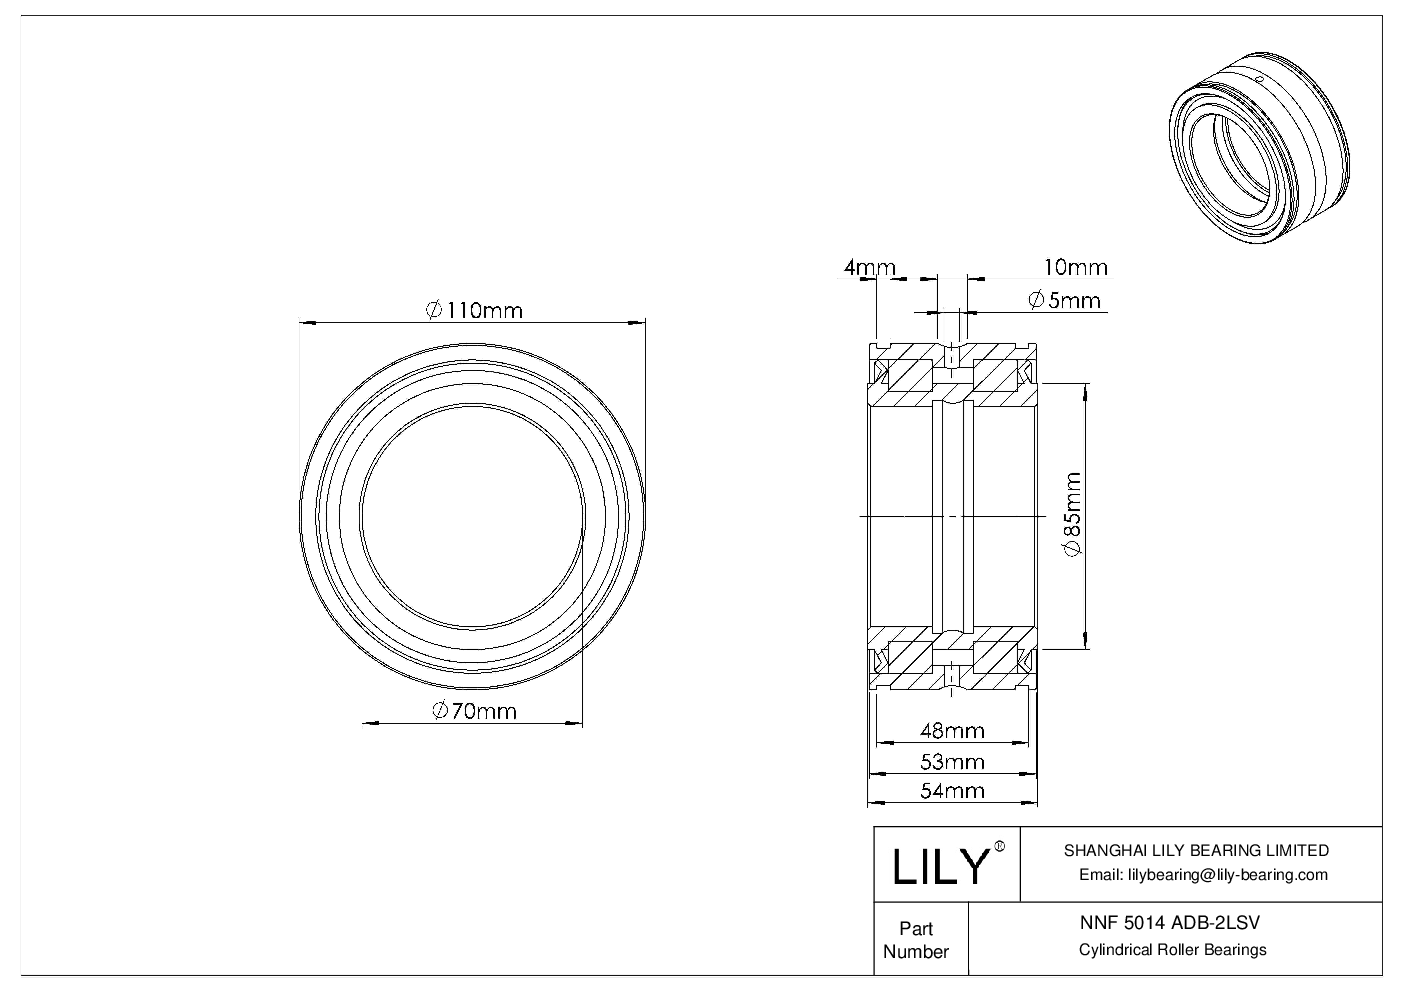 NNF 5014 ADB-2LSV Double Row Full Complement Cylindrical Roller Bearings cad drawing